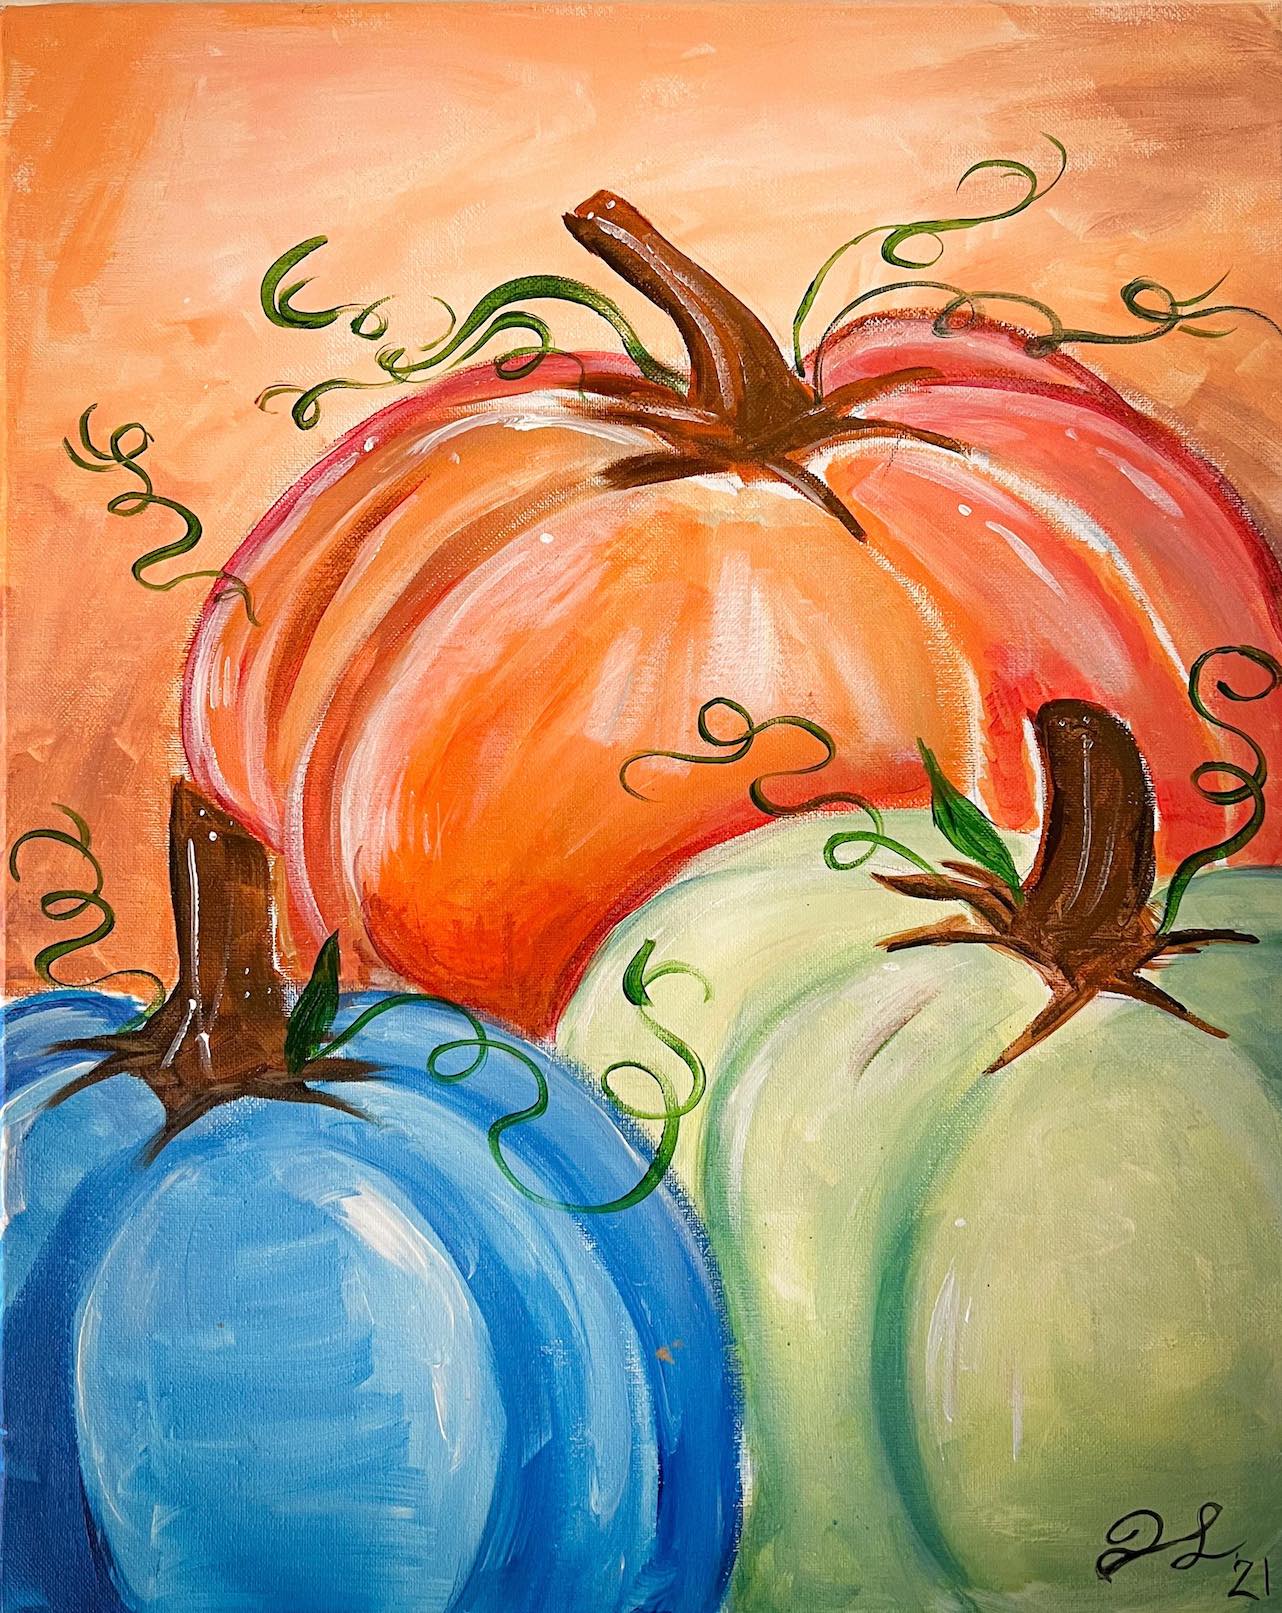 Cake & Canvas! Crumb & Cream Cake Decorating & "Colorful Pumpkins" Painting Class | 6:30-8:30pm